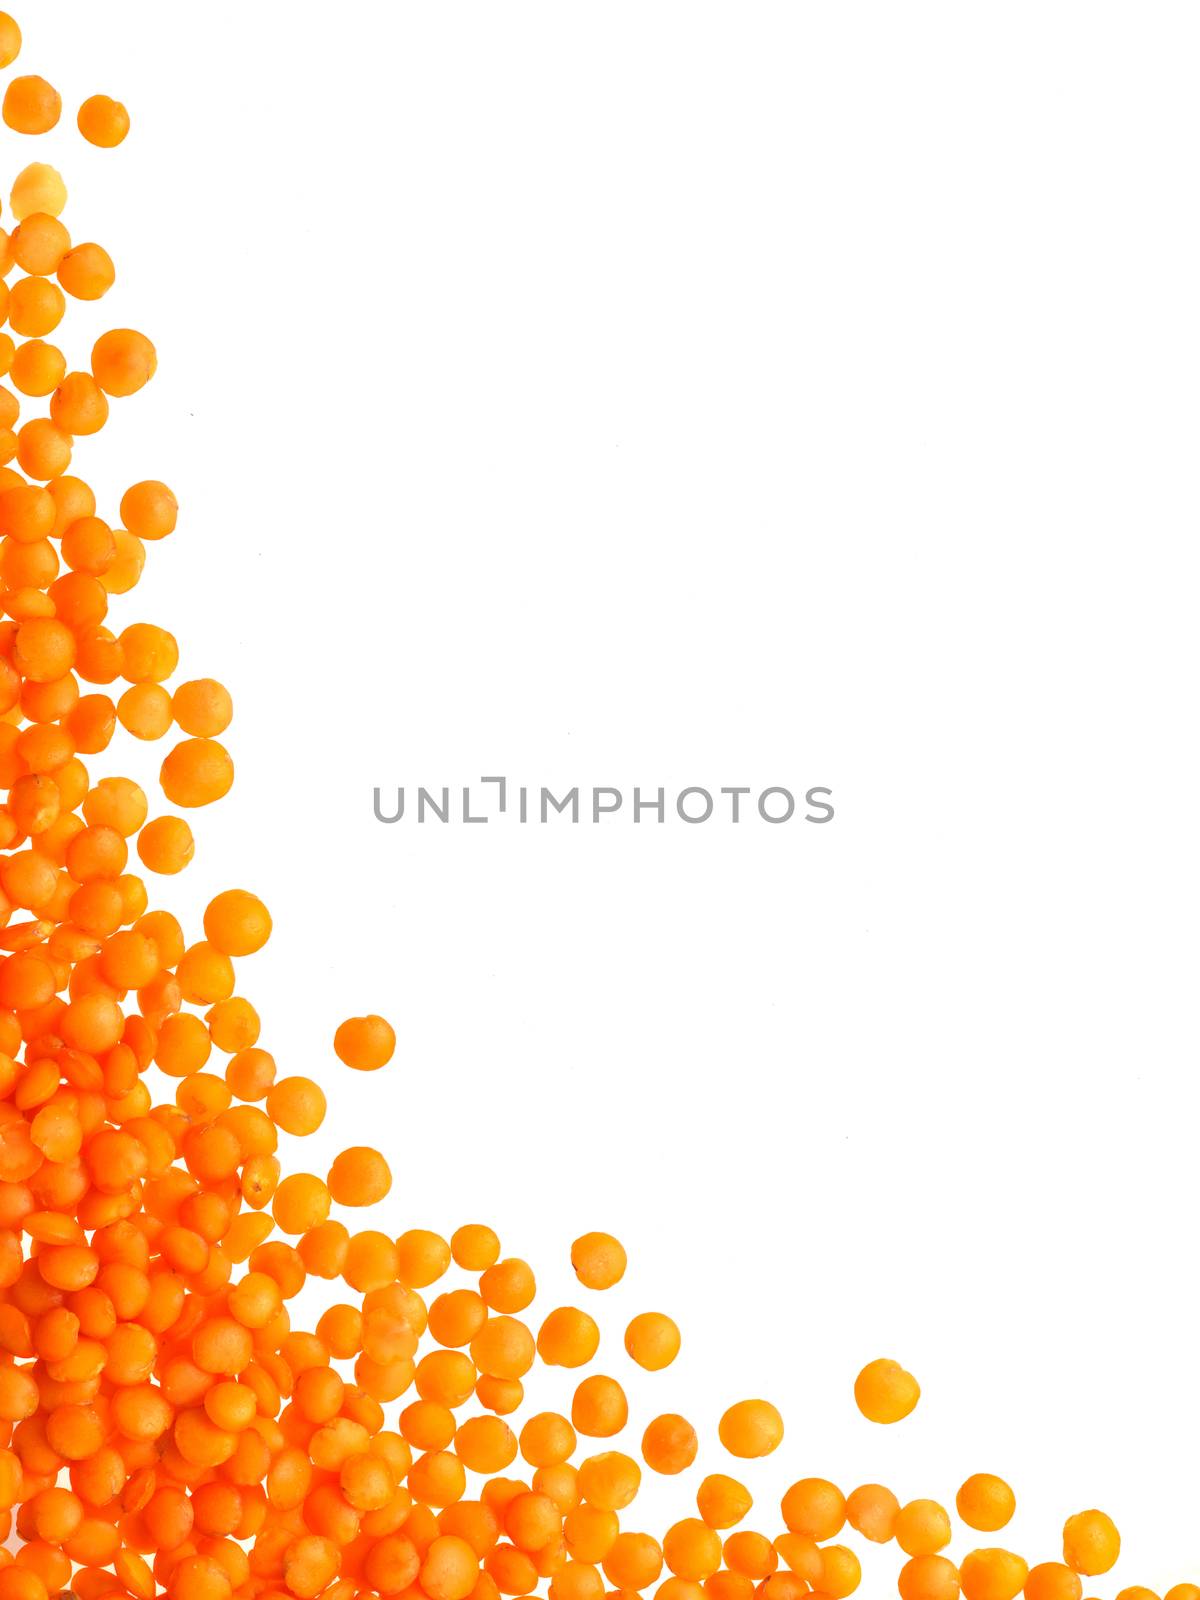 Red orange lentil Football type with copy space. Isolated one edge. Top view or flat lay. Vertical.